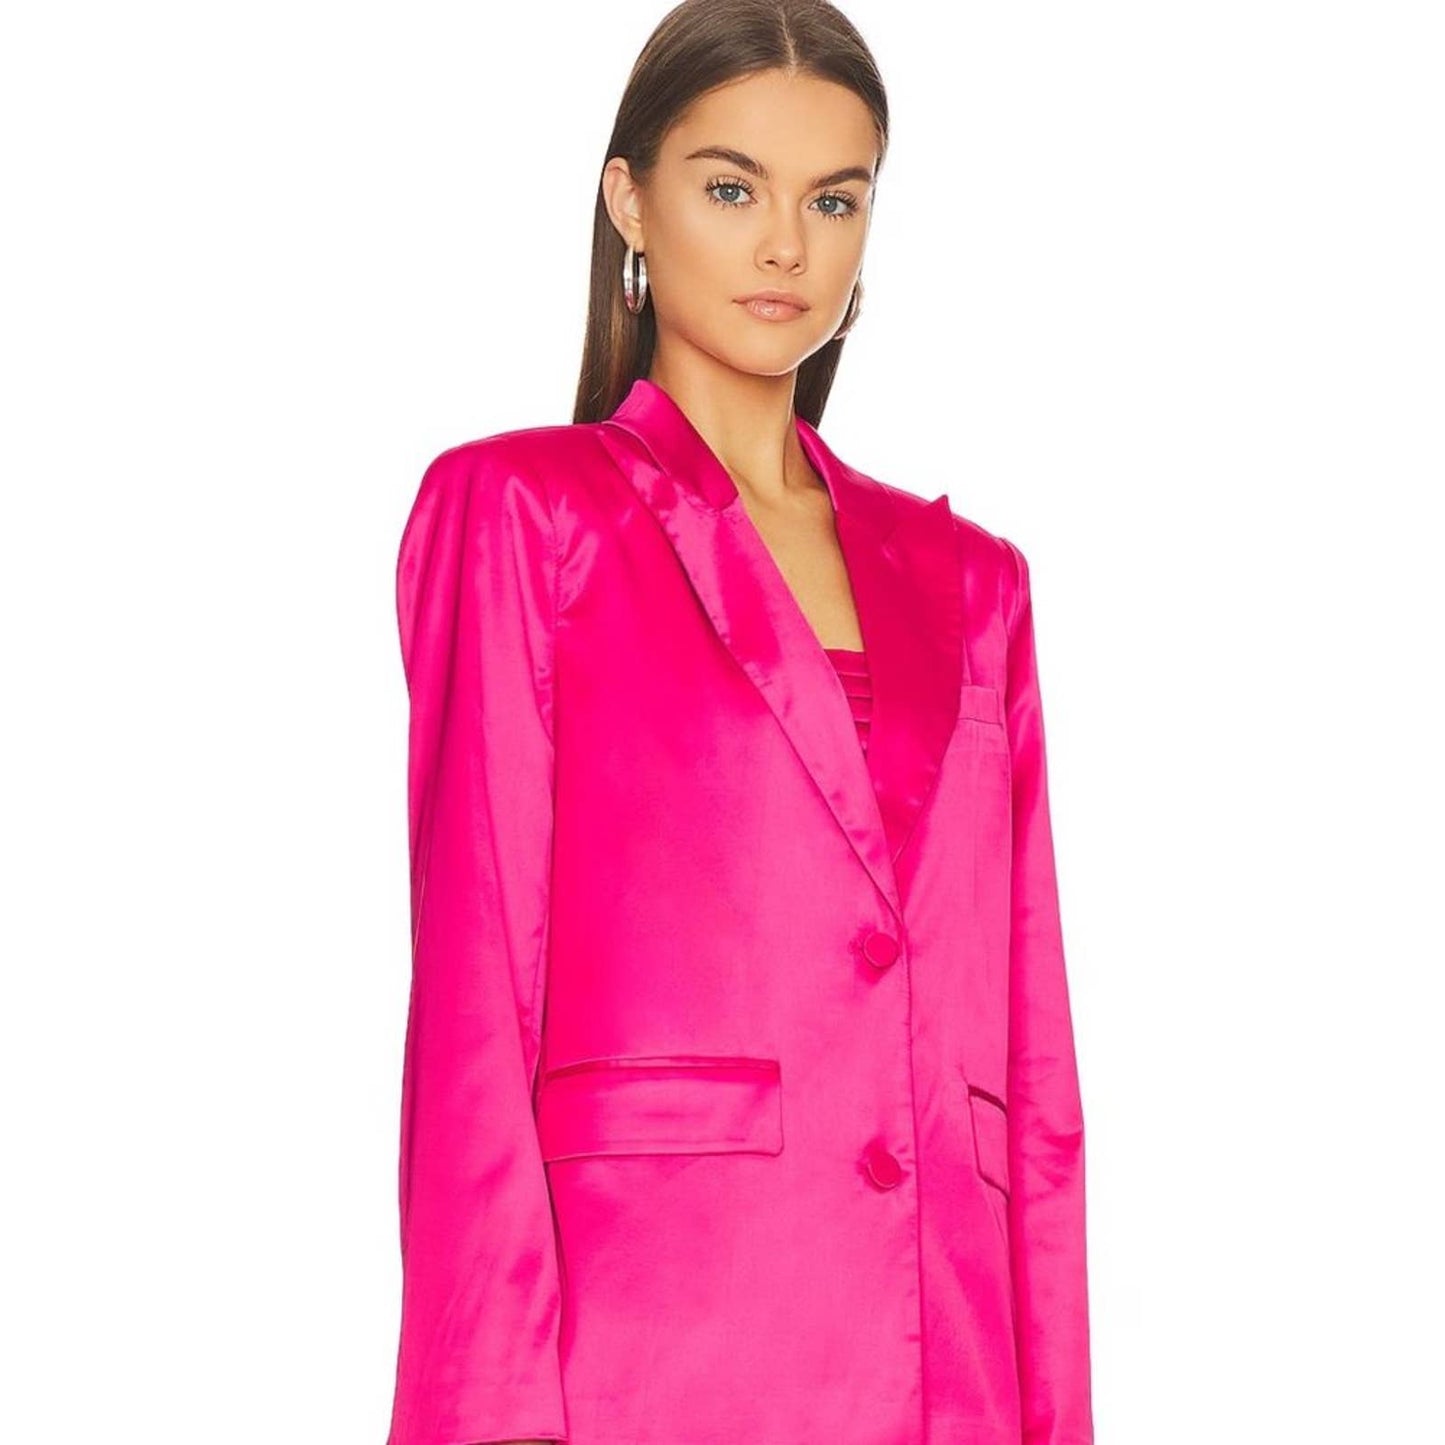 Lovers and Friends Andie Blazer in Raspberry Pink NWT Size Medium